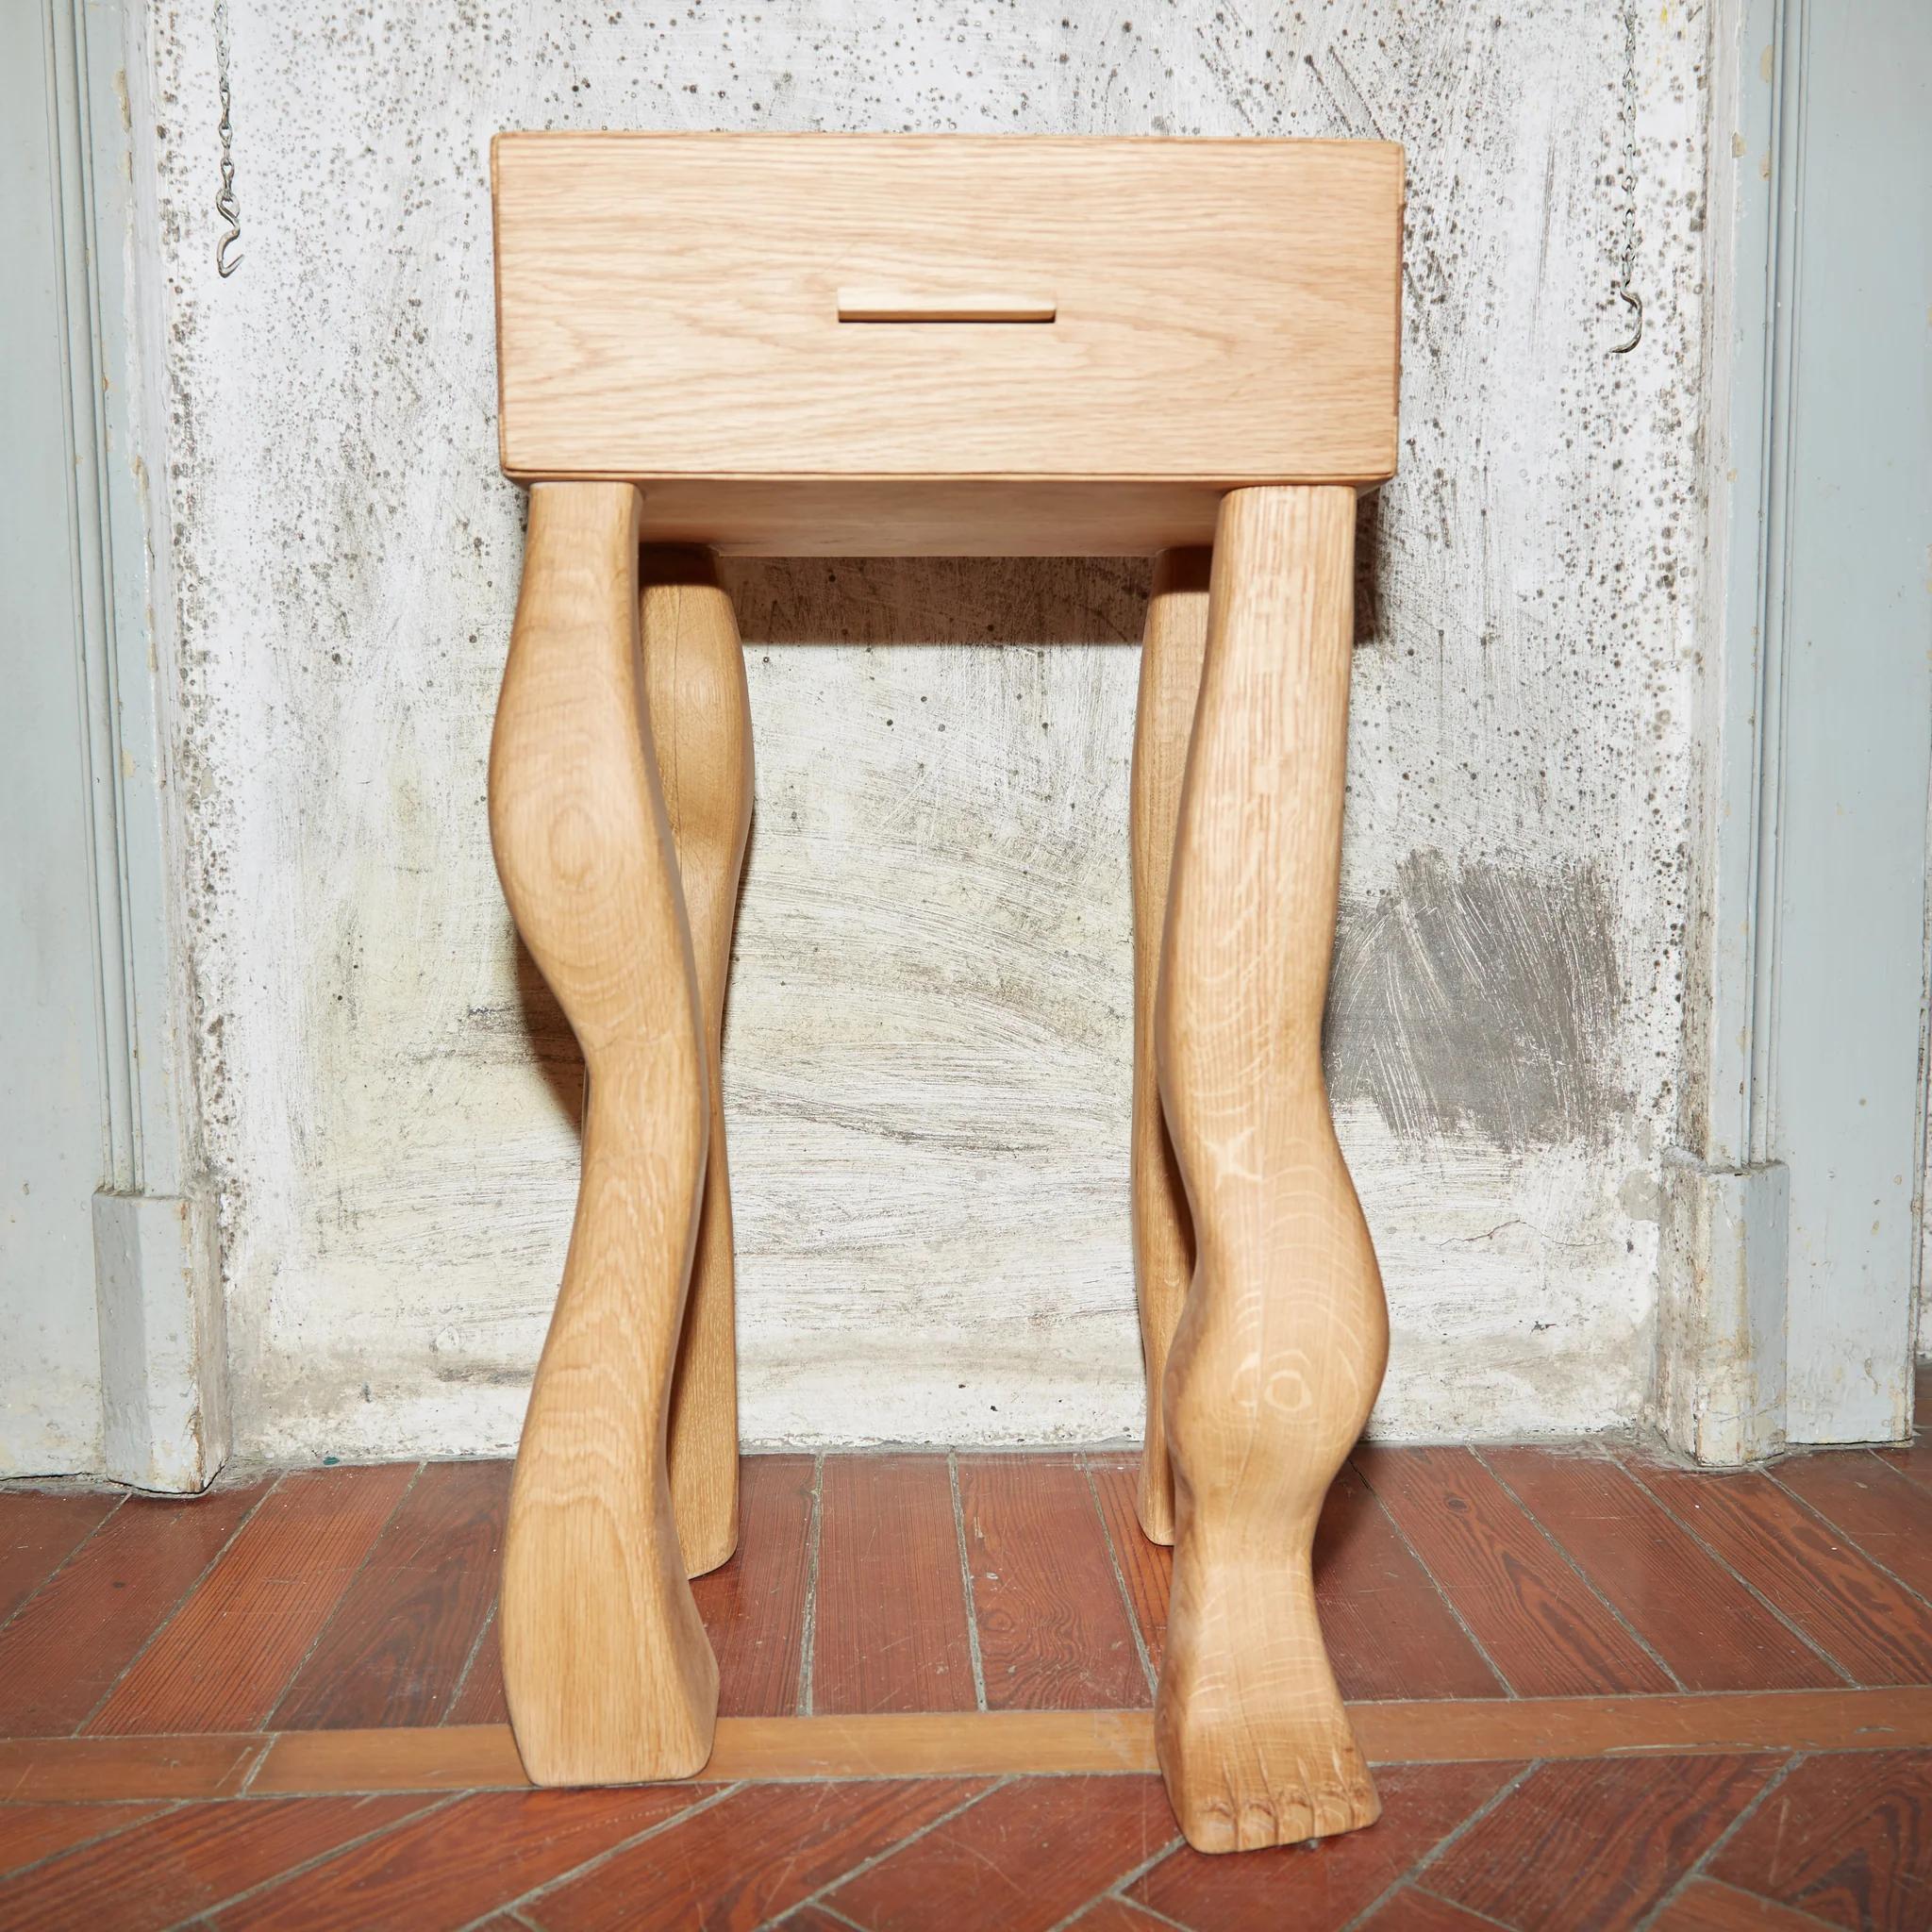 Foot Side Table With Drawer by Project 213A
Dimensions: W 32 x D 28 x H 62 cm
Materials: Oak

The Foot Side Table is made from Oak wood with carefully designed jointing details. The drawer stands on 4 irregular legs of which one has a foot. The